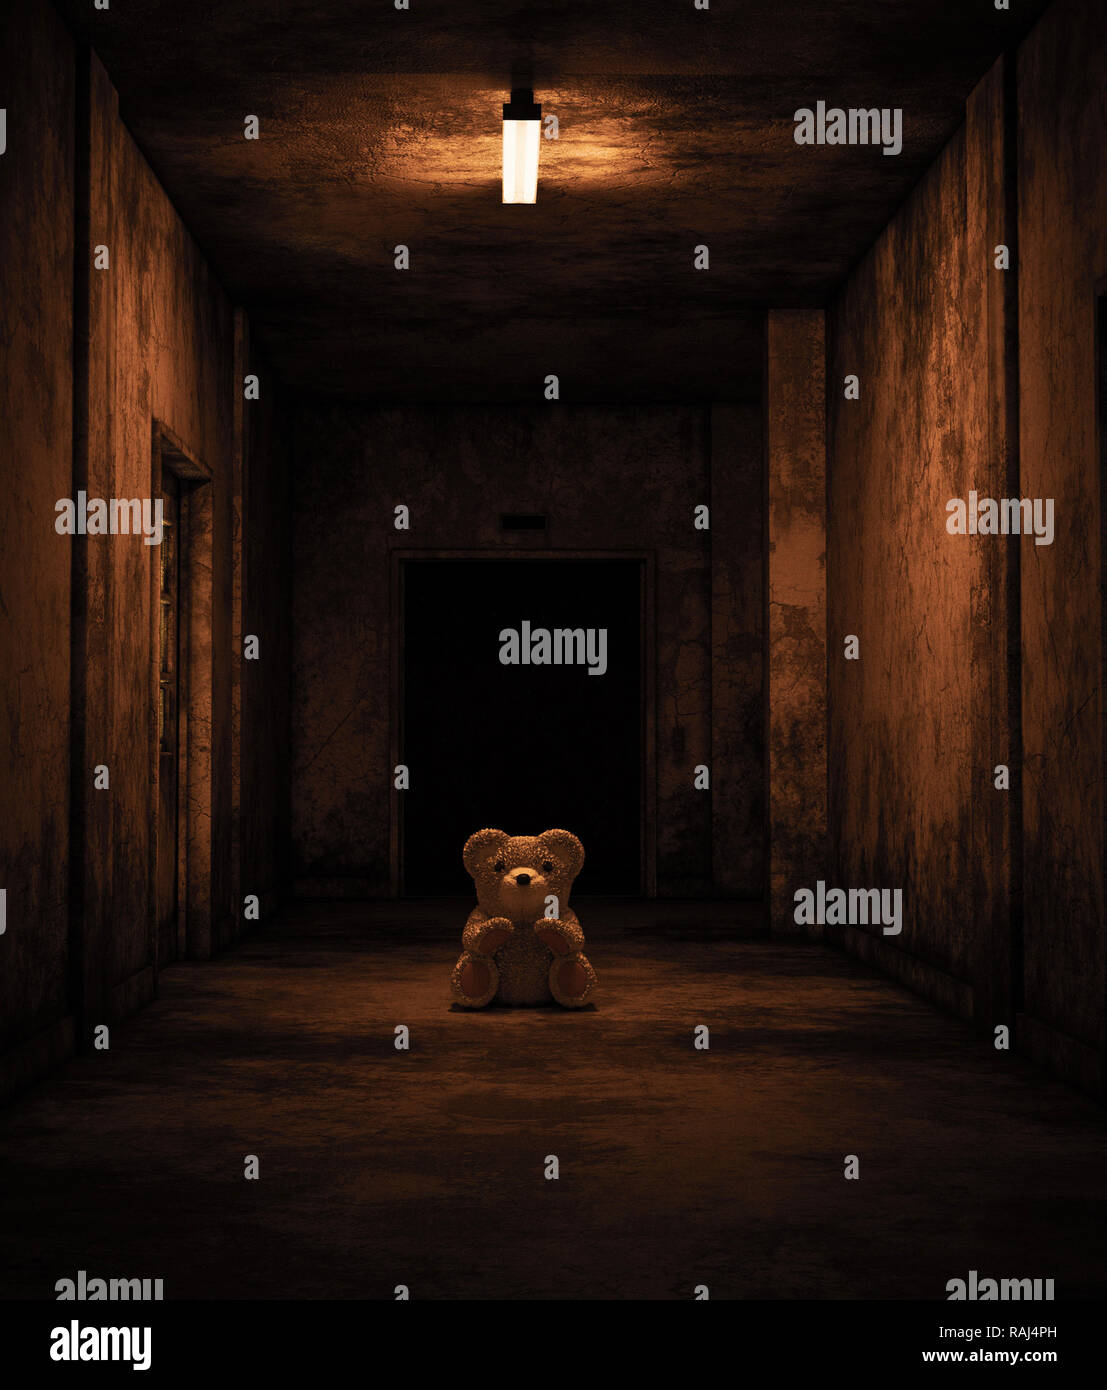 Teddy bear sitting in haunted house,Scary background for book cover Stock Photo